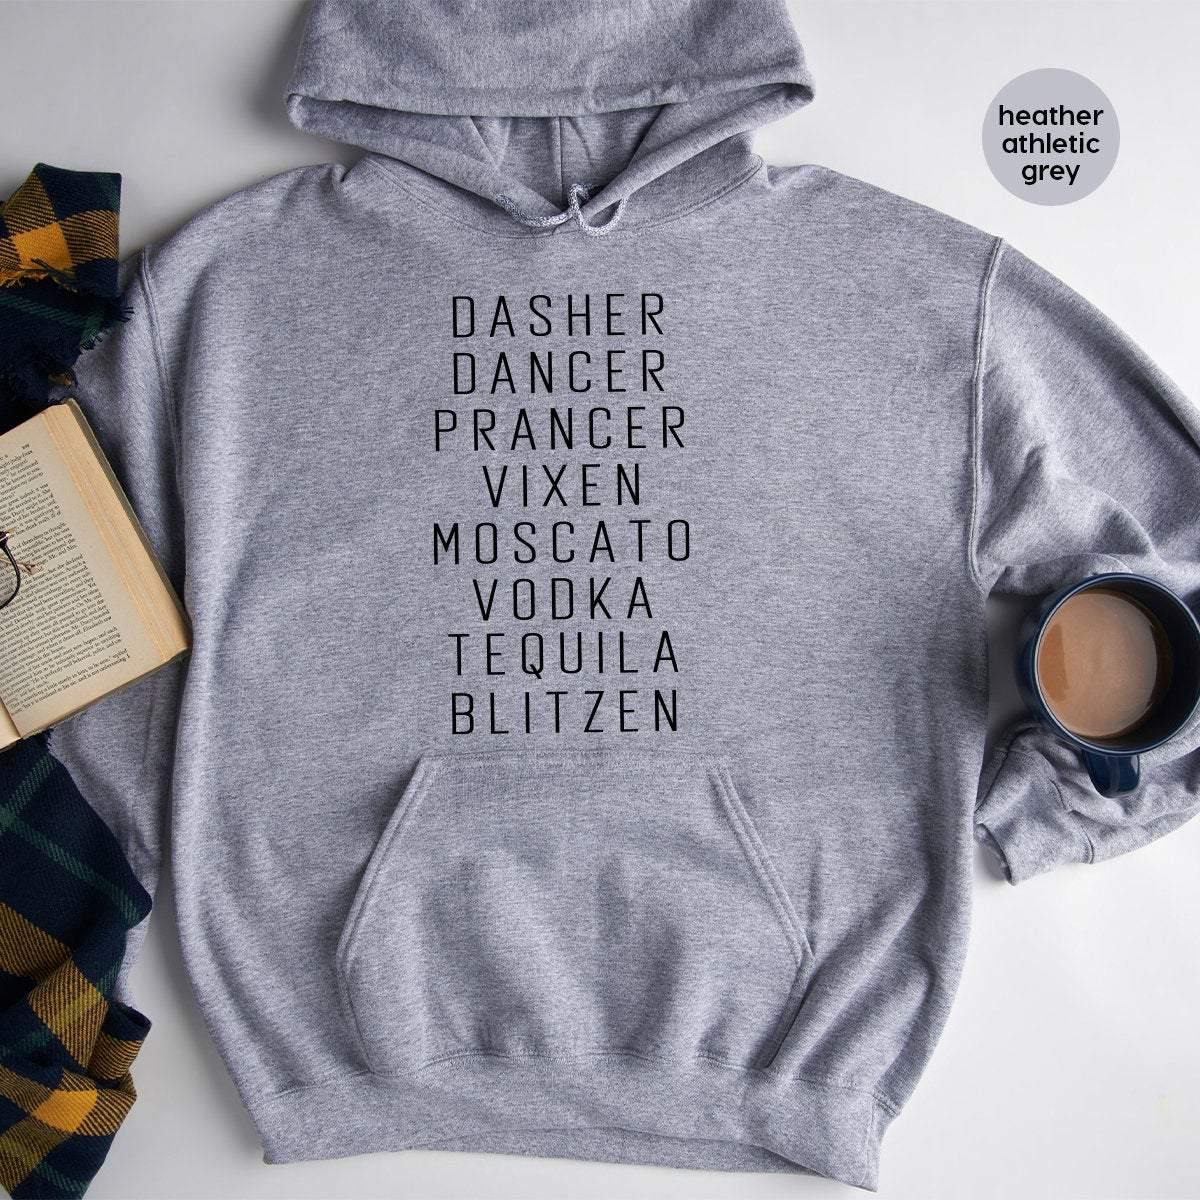 Funny Christmas Hoodie, Funny Drinking Hoodie, Funny Alcoholic Hoodie, Drinking Party Tee, Dasher Dancer Prancer Vixen Moscato Vodka Tequila - Fastdeliverytees.com